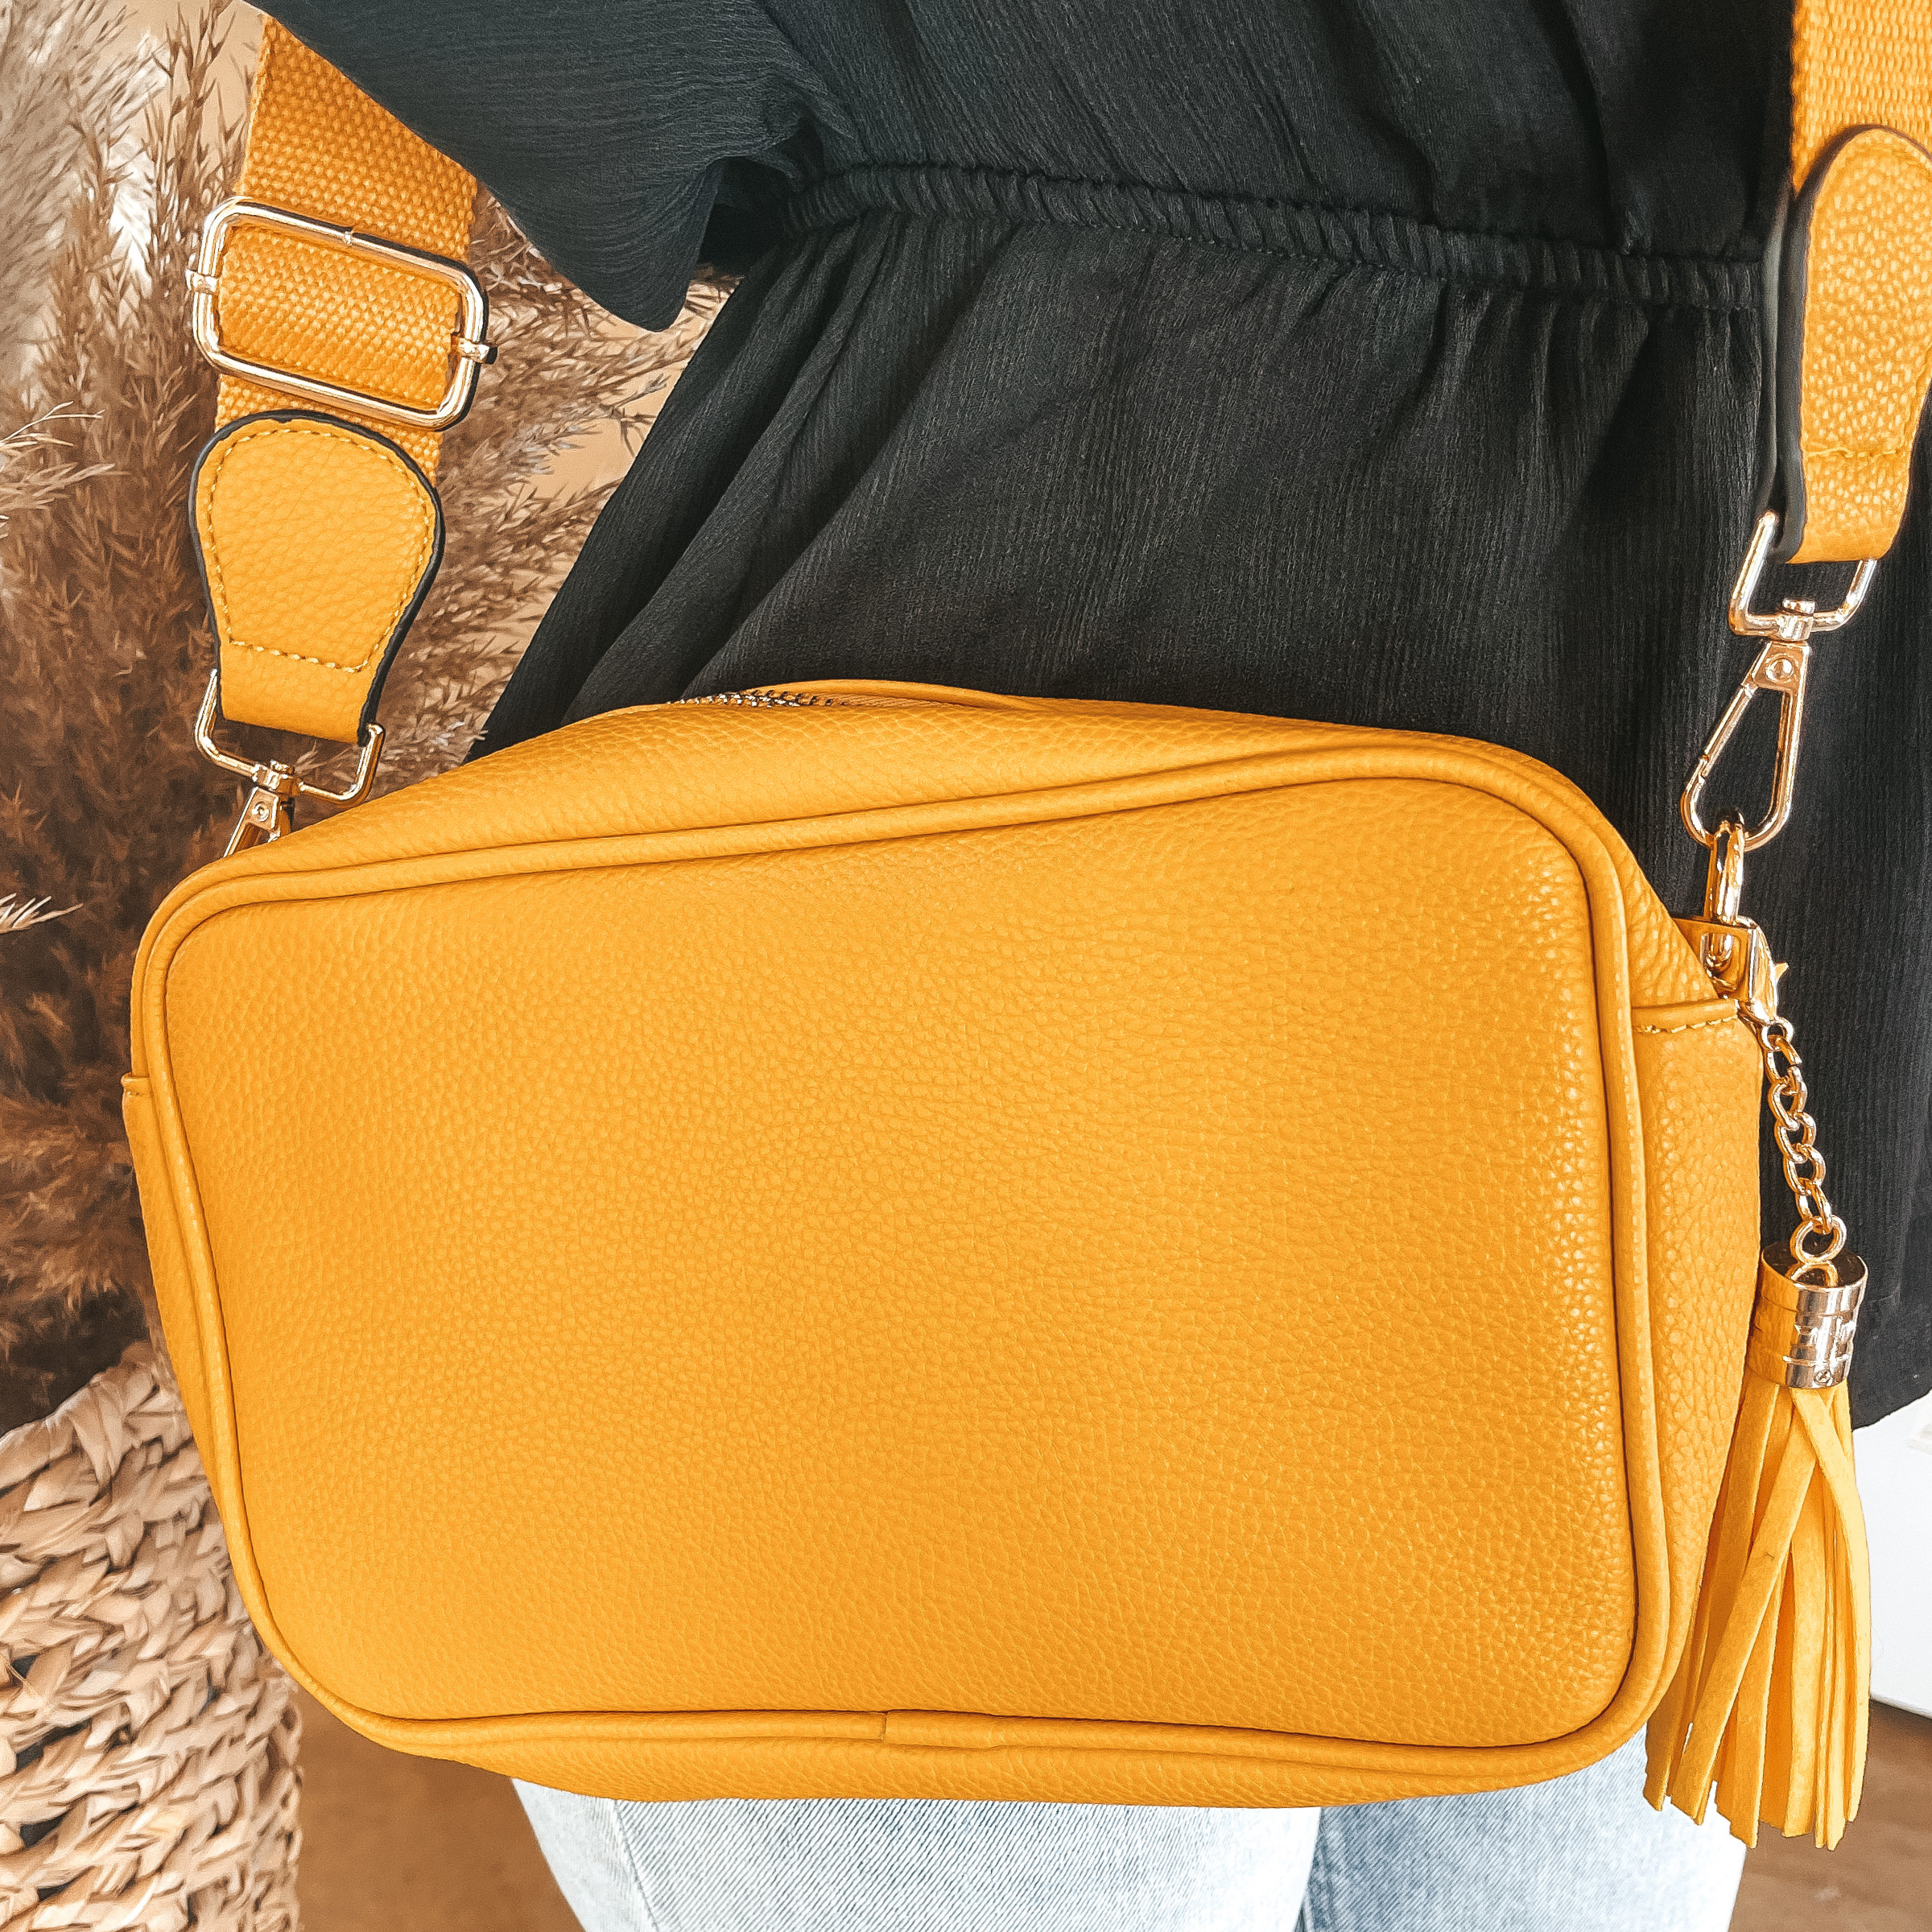 Lovin' Life Small Rectangle Crossbody Purse in Mustard - Giddy Up Glamour Boutique